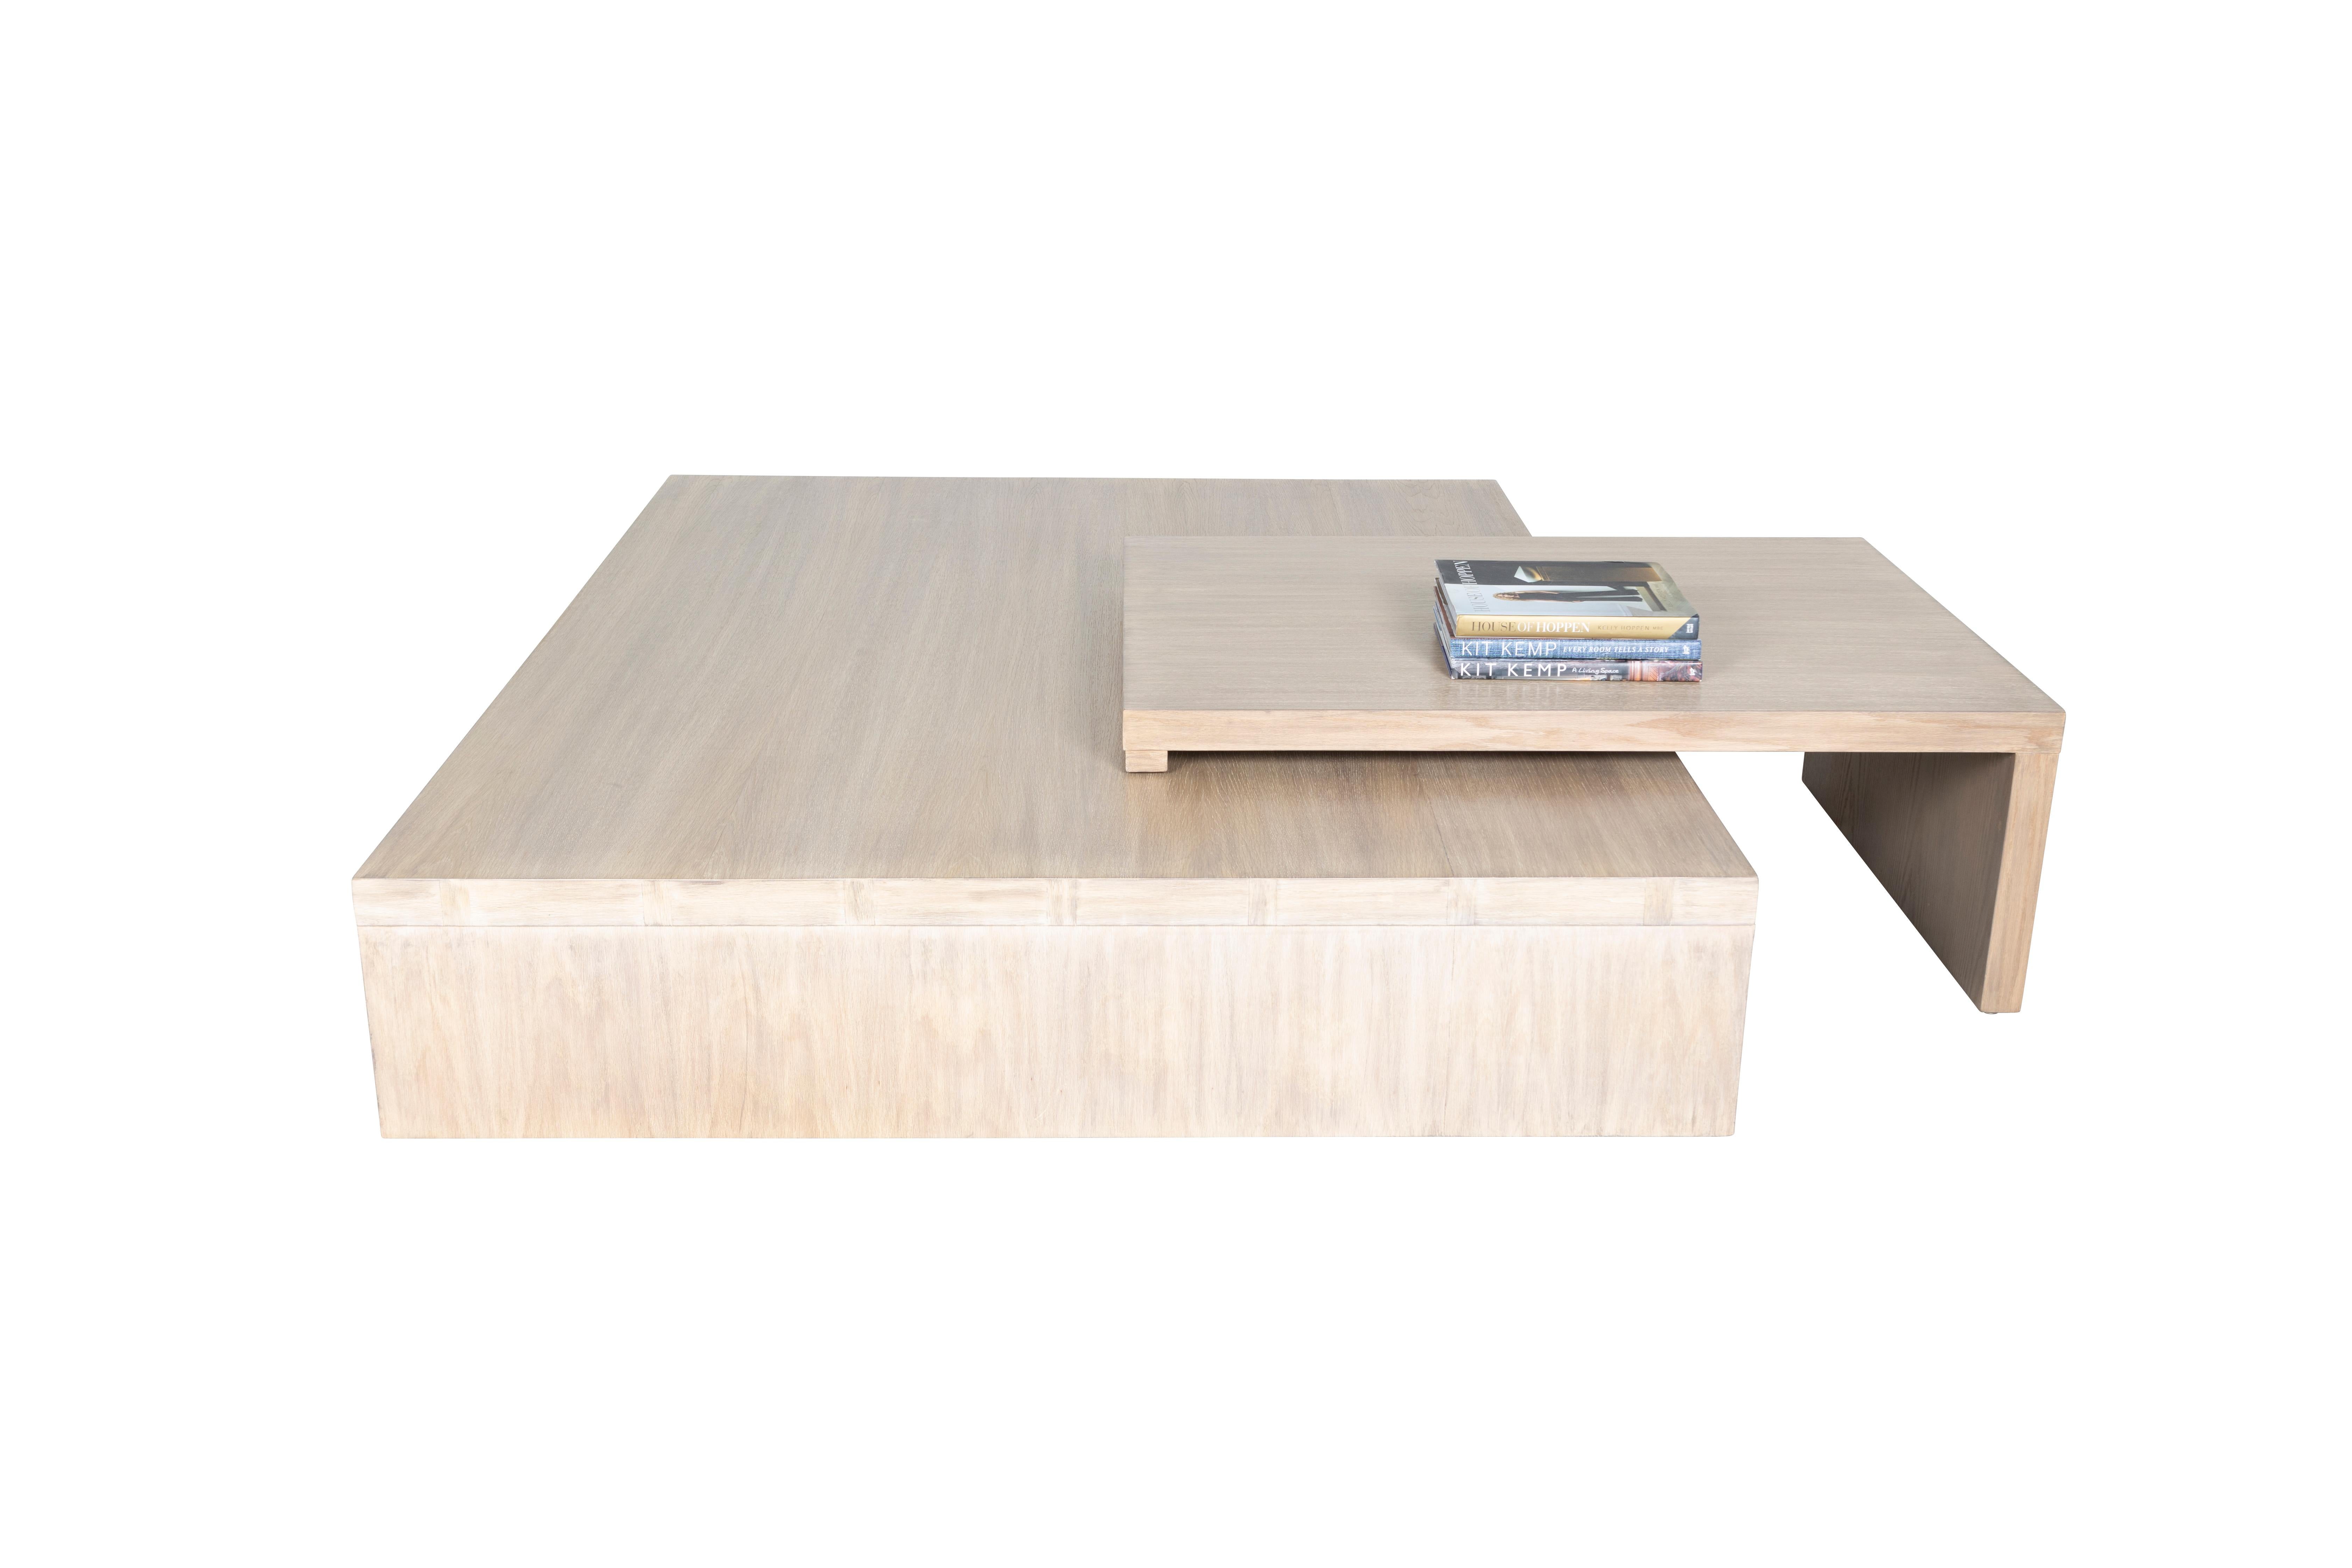 Hand-made tiered coffee table. Blonde oak with dove tailed ends.

Designed by Brendan Bass for the Vision and Design Collection, by using high quality materials and textures. All materials are sourced from local vendors throughout the state of